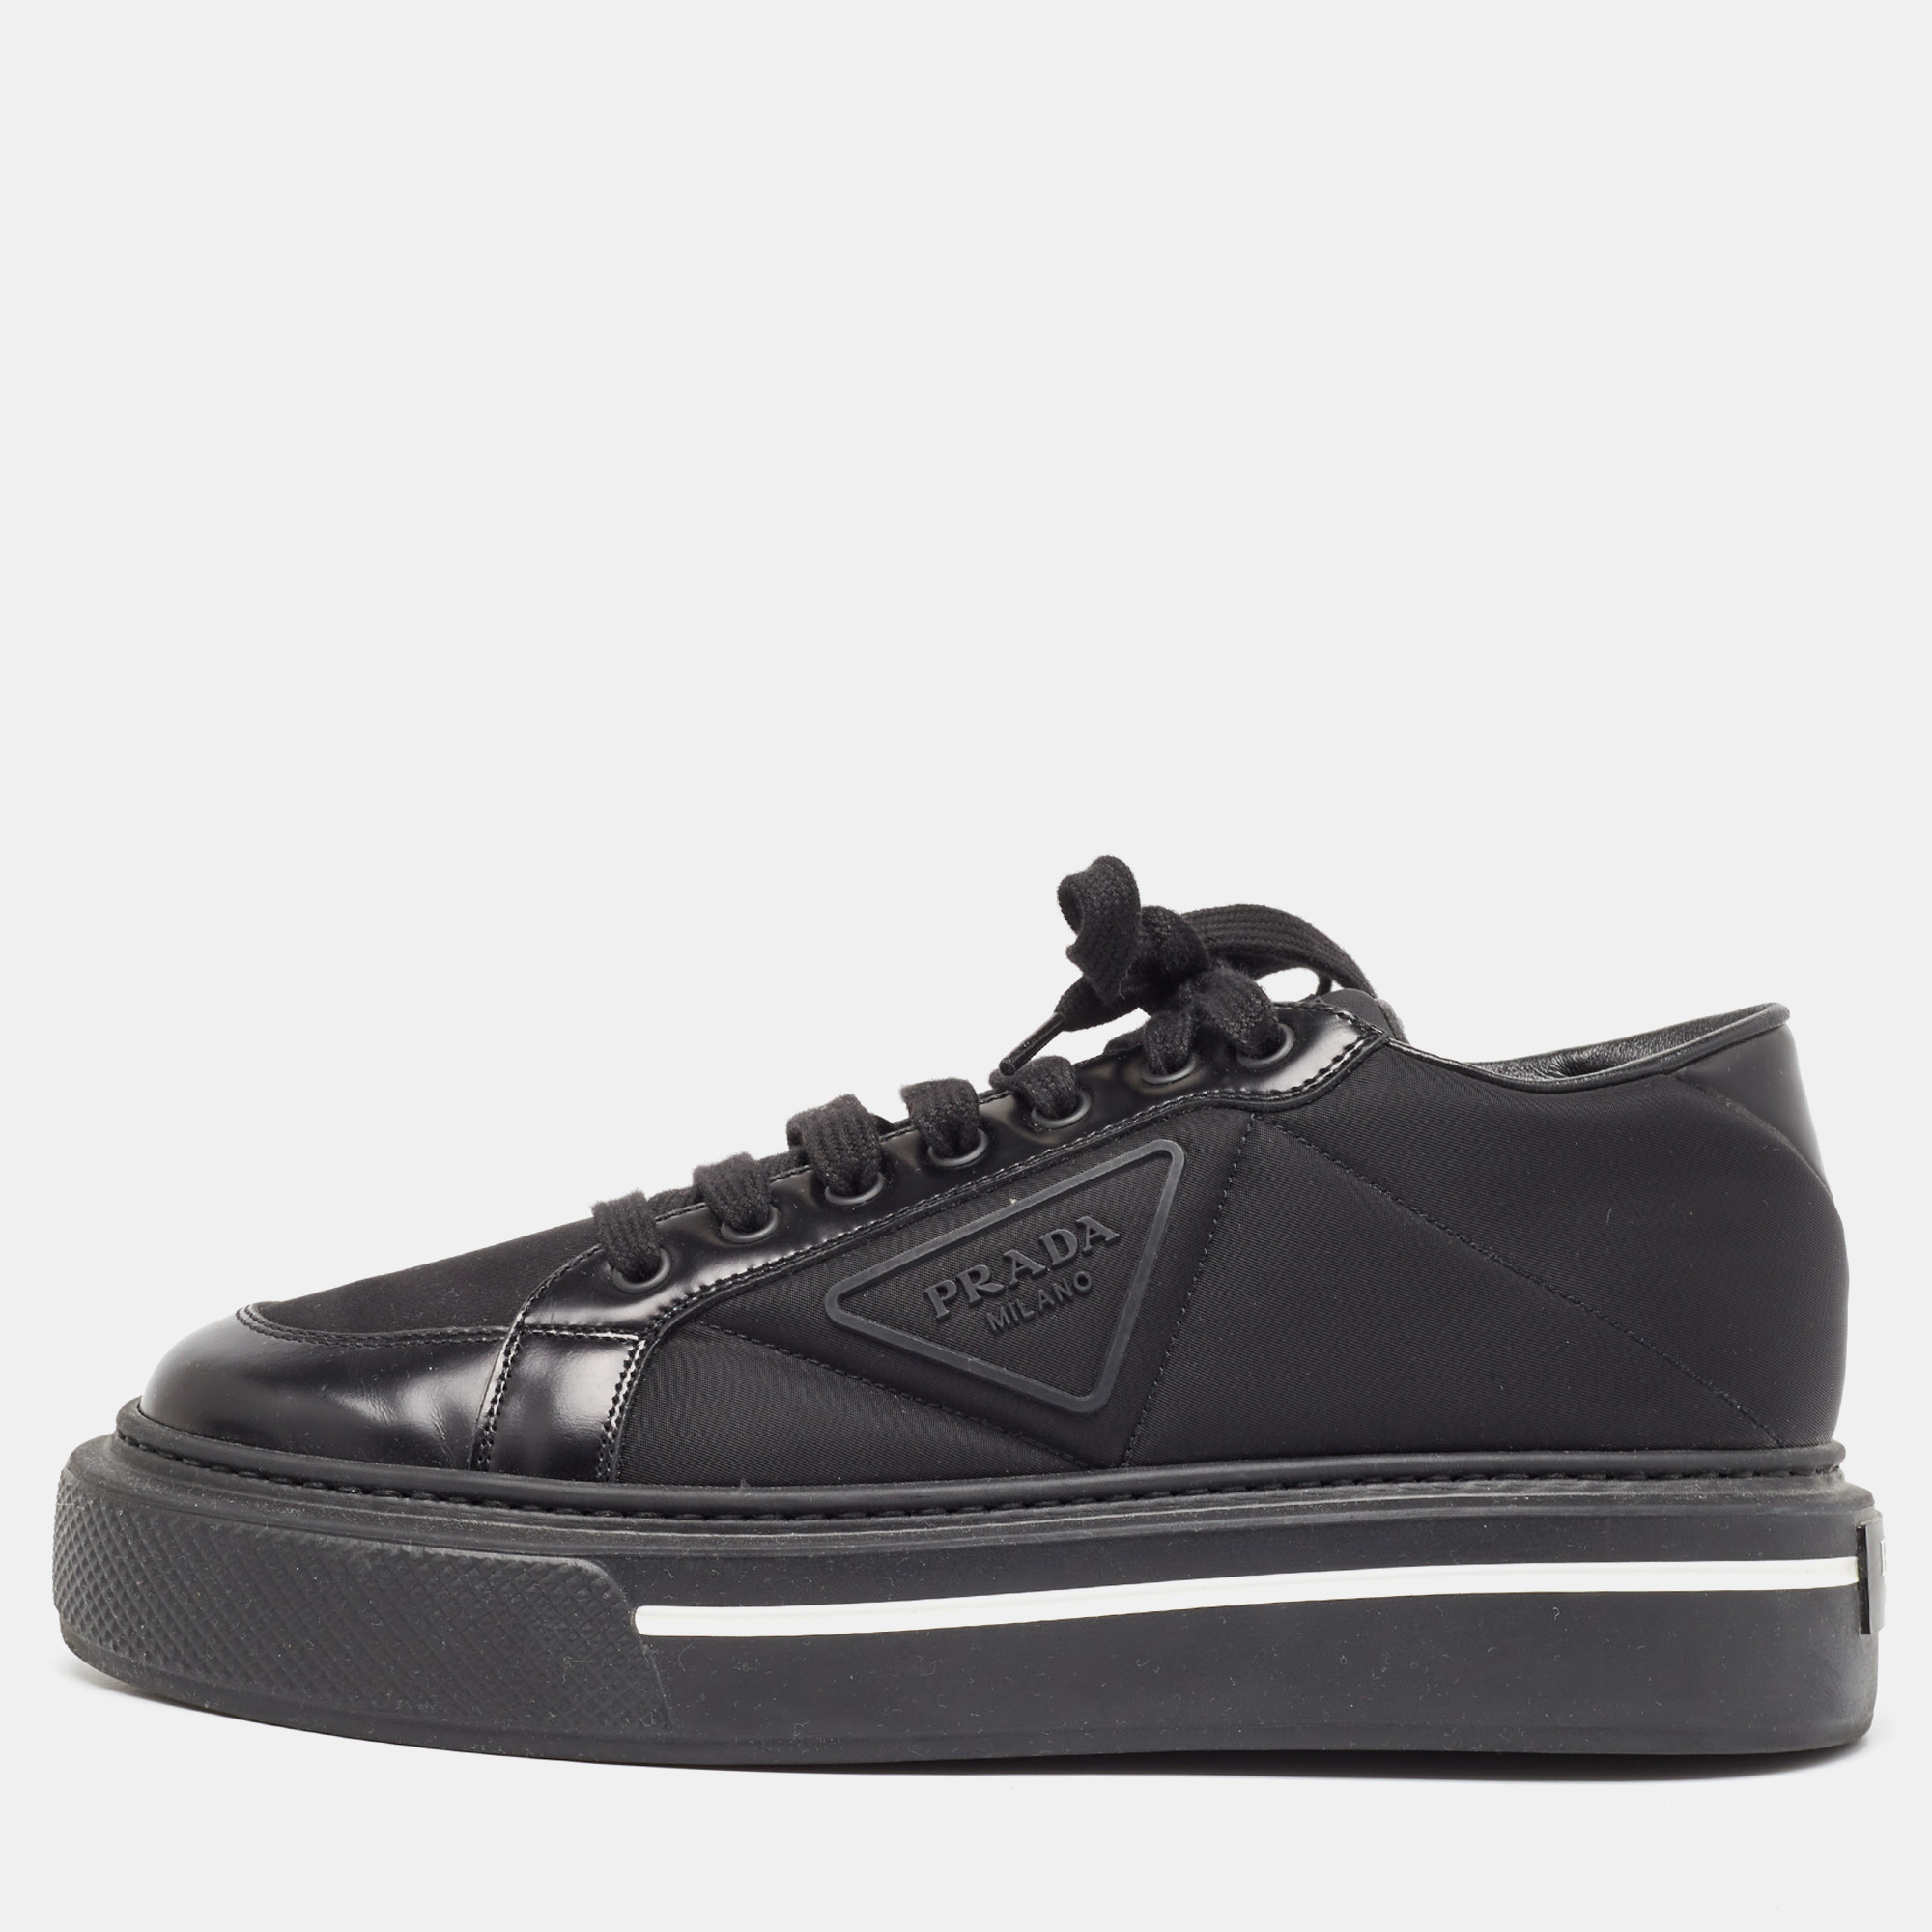 

Prada Black Brushed Leather Re Nylon Lace Up Sneakers Size